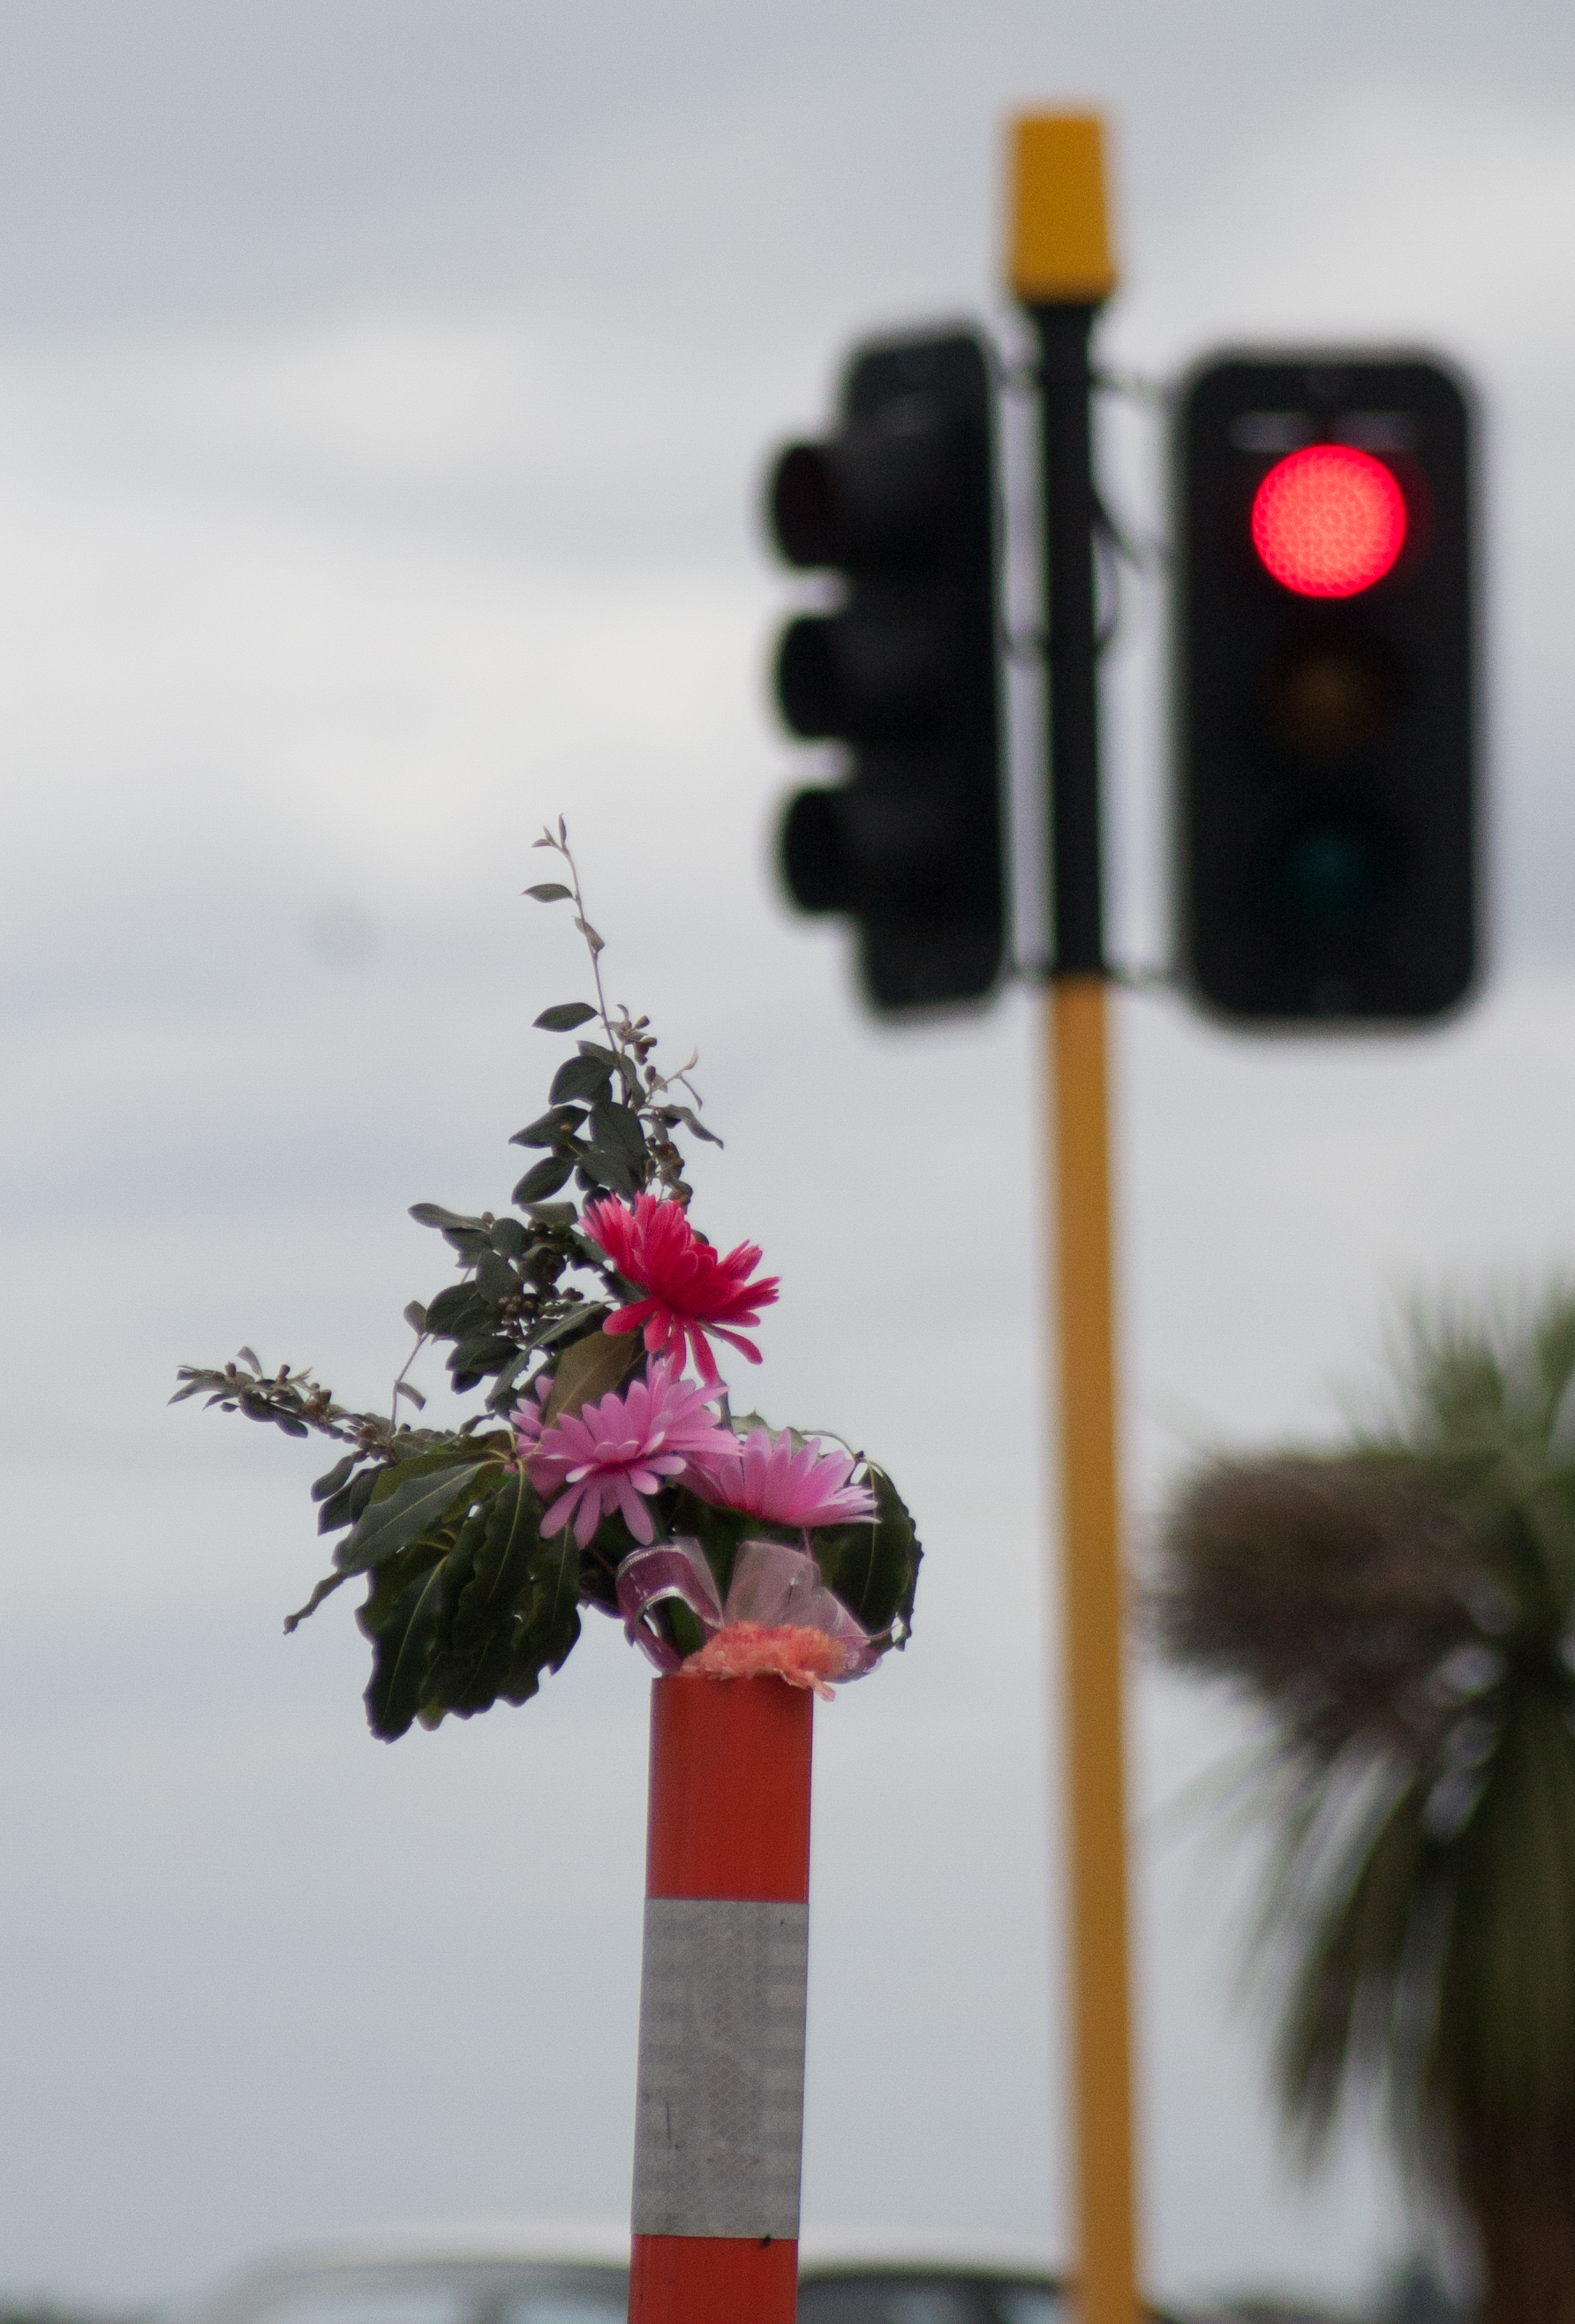 flowers in a road cone - two years exactly from the 22/02/2011 christchurch earthquake